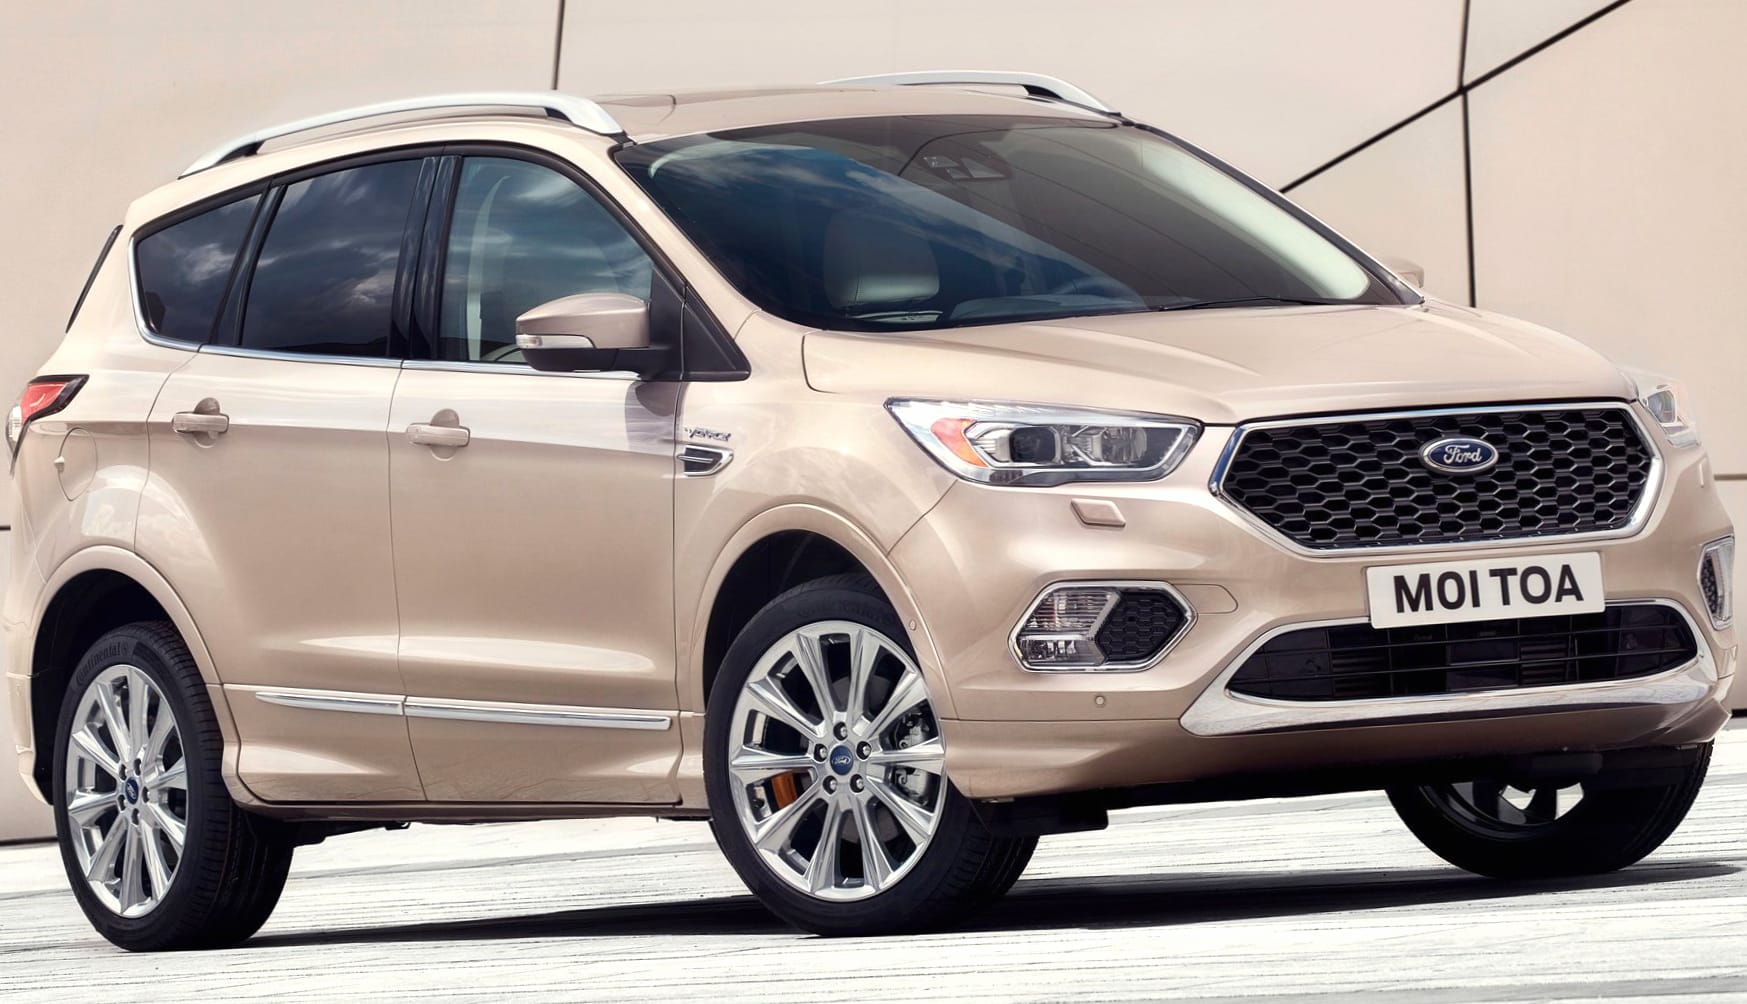 Ford Vignale Kuga wallpapers HD quality